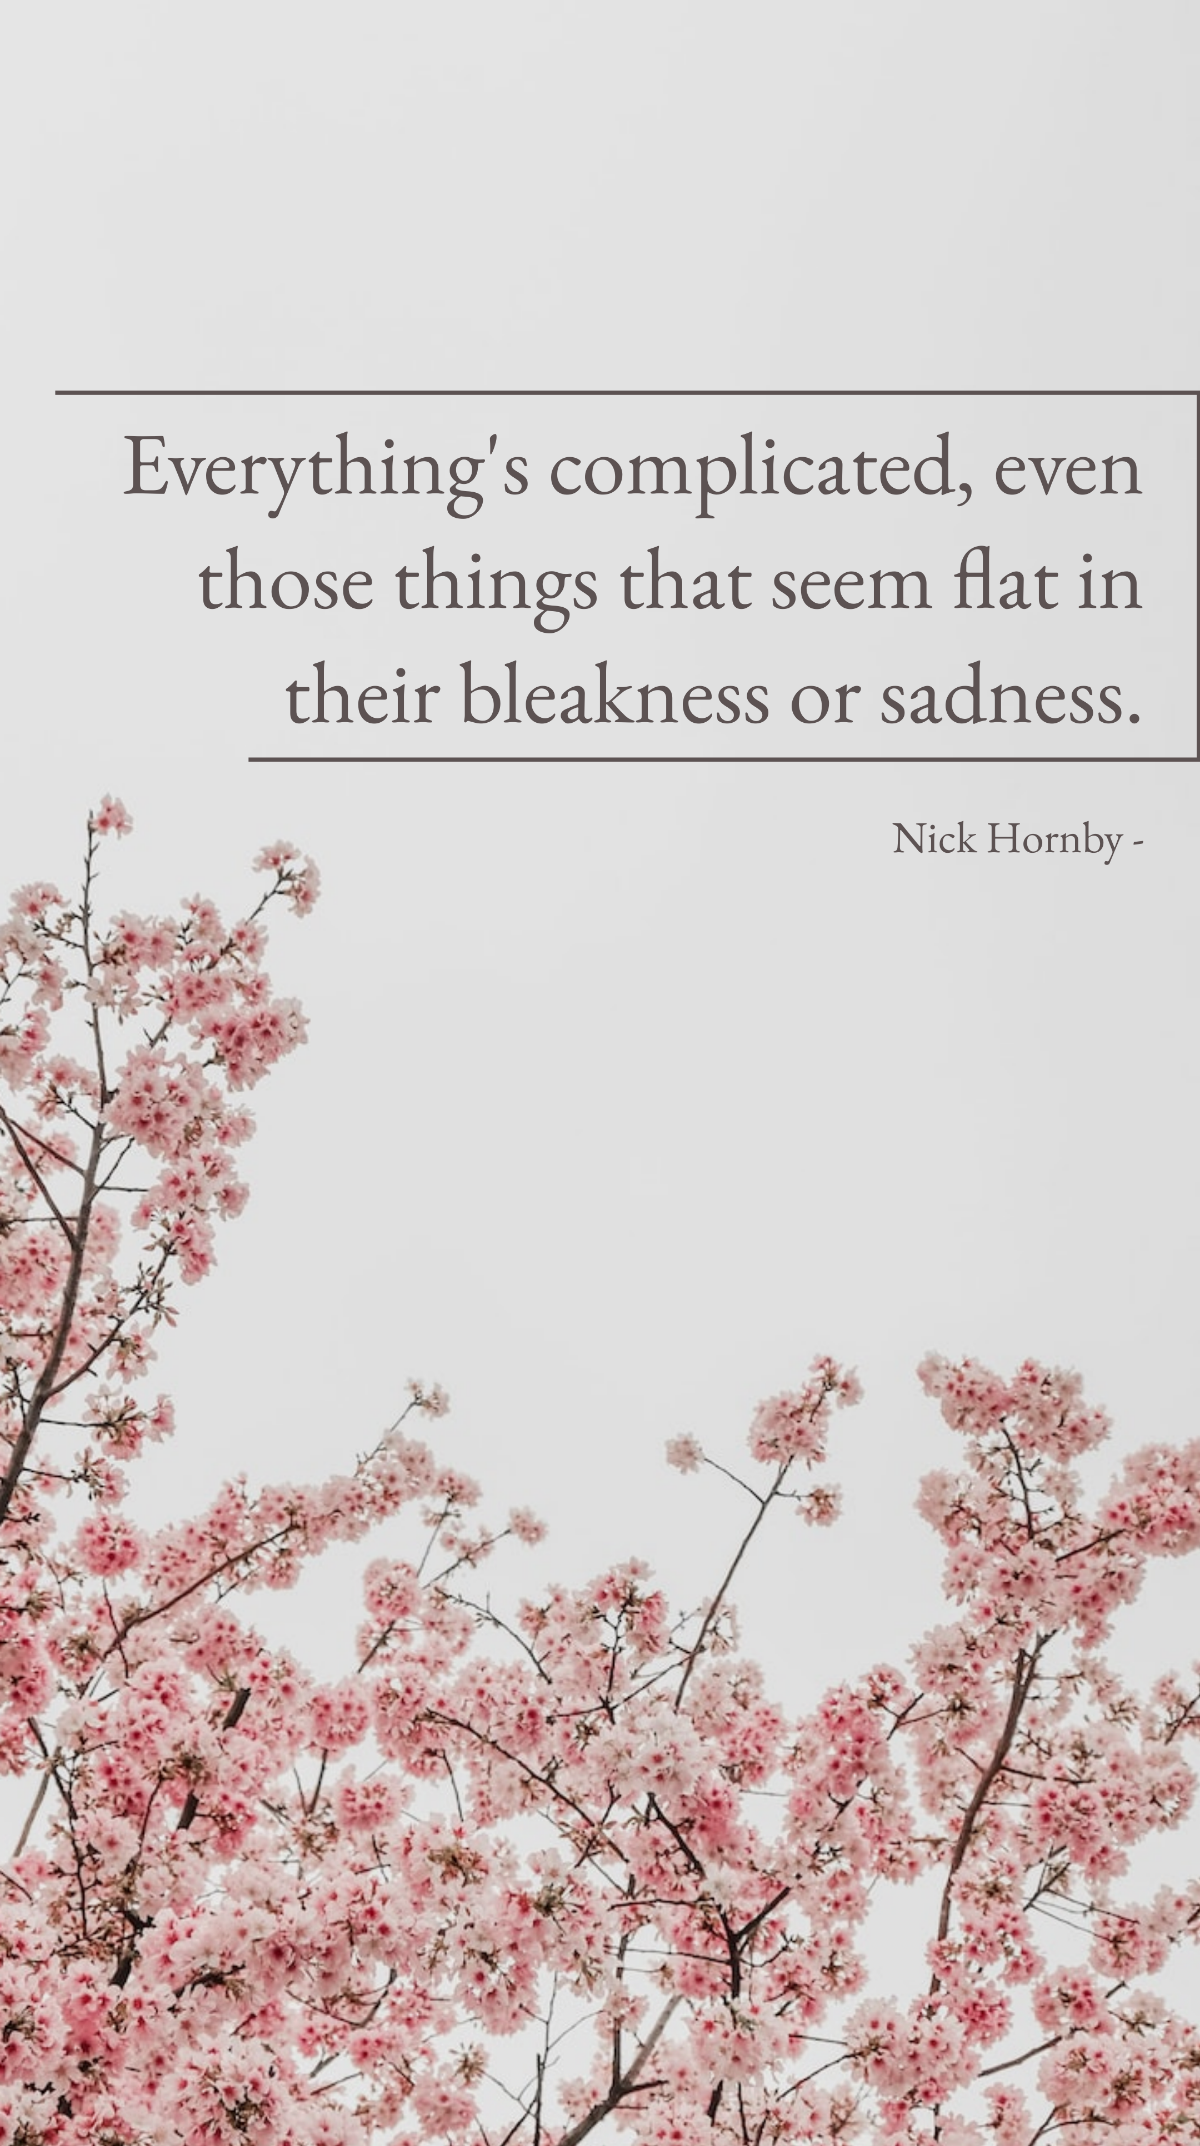 Nick Hornby - Everything's complicated, even those things that seem flat in their bleakness or sadness. Template